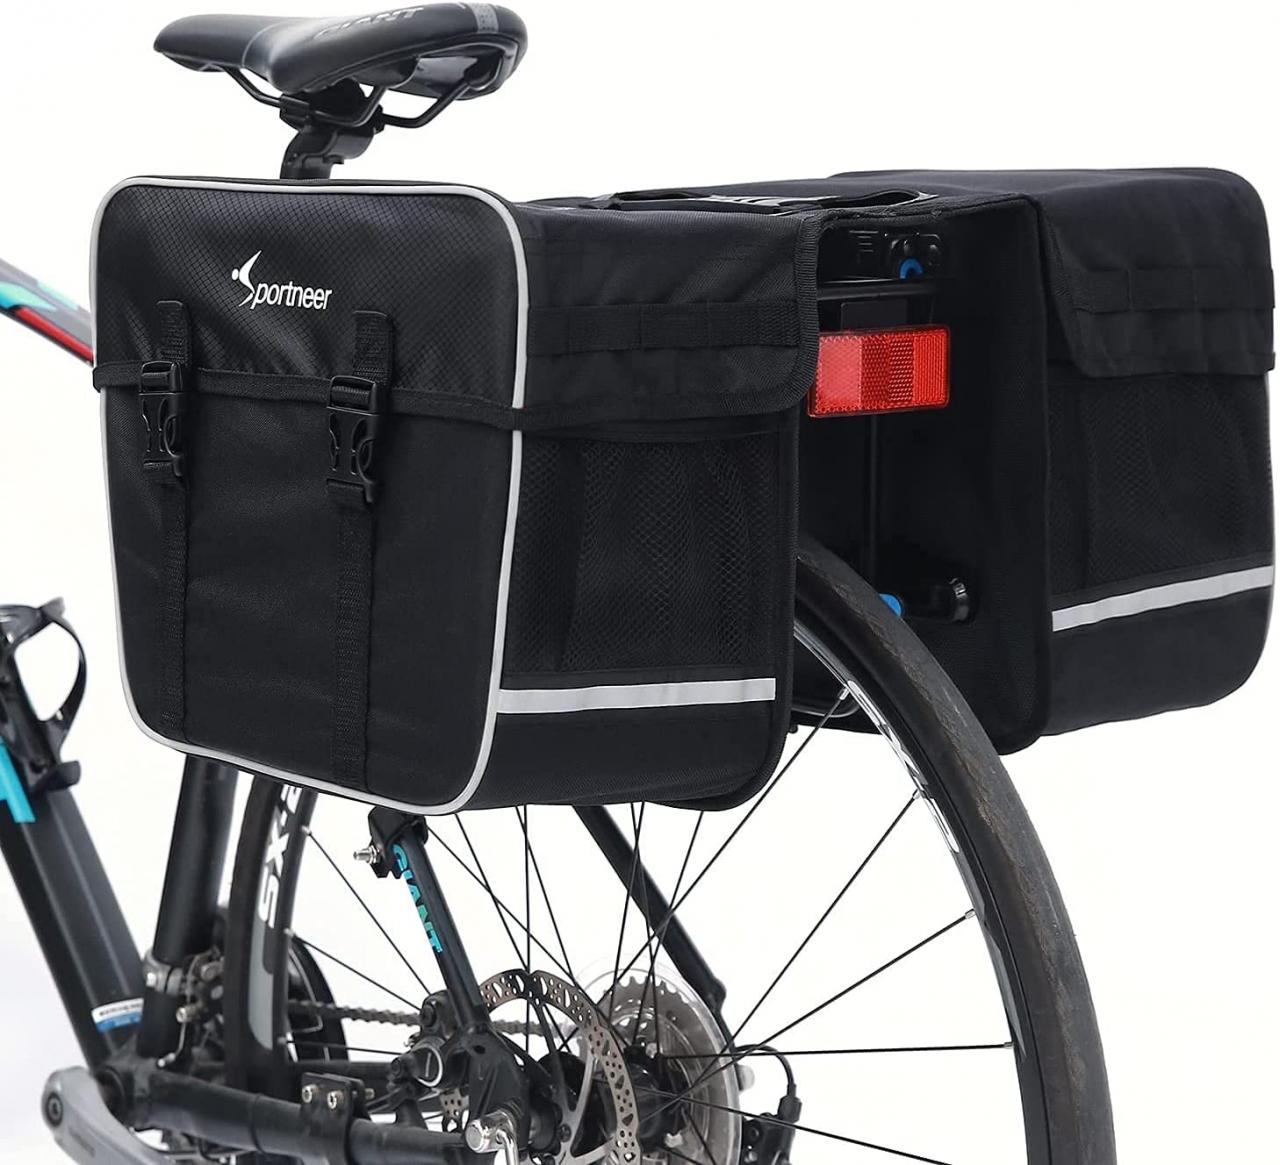 Buy Sportneer Bike Panniers Grocery Bag for Bicycle Rear Rack with  Ultra-Stable Hooks Anti-Tear & Bounce-Proof Bike Storage Bag with Rain  Cover for Cycling Touring/Commuting/Grocery Shopping Online in Hong Kong.  B08W1Q6PJ5